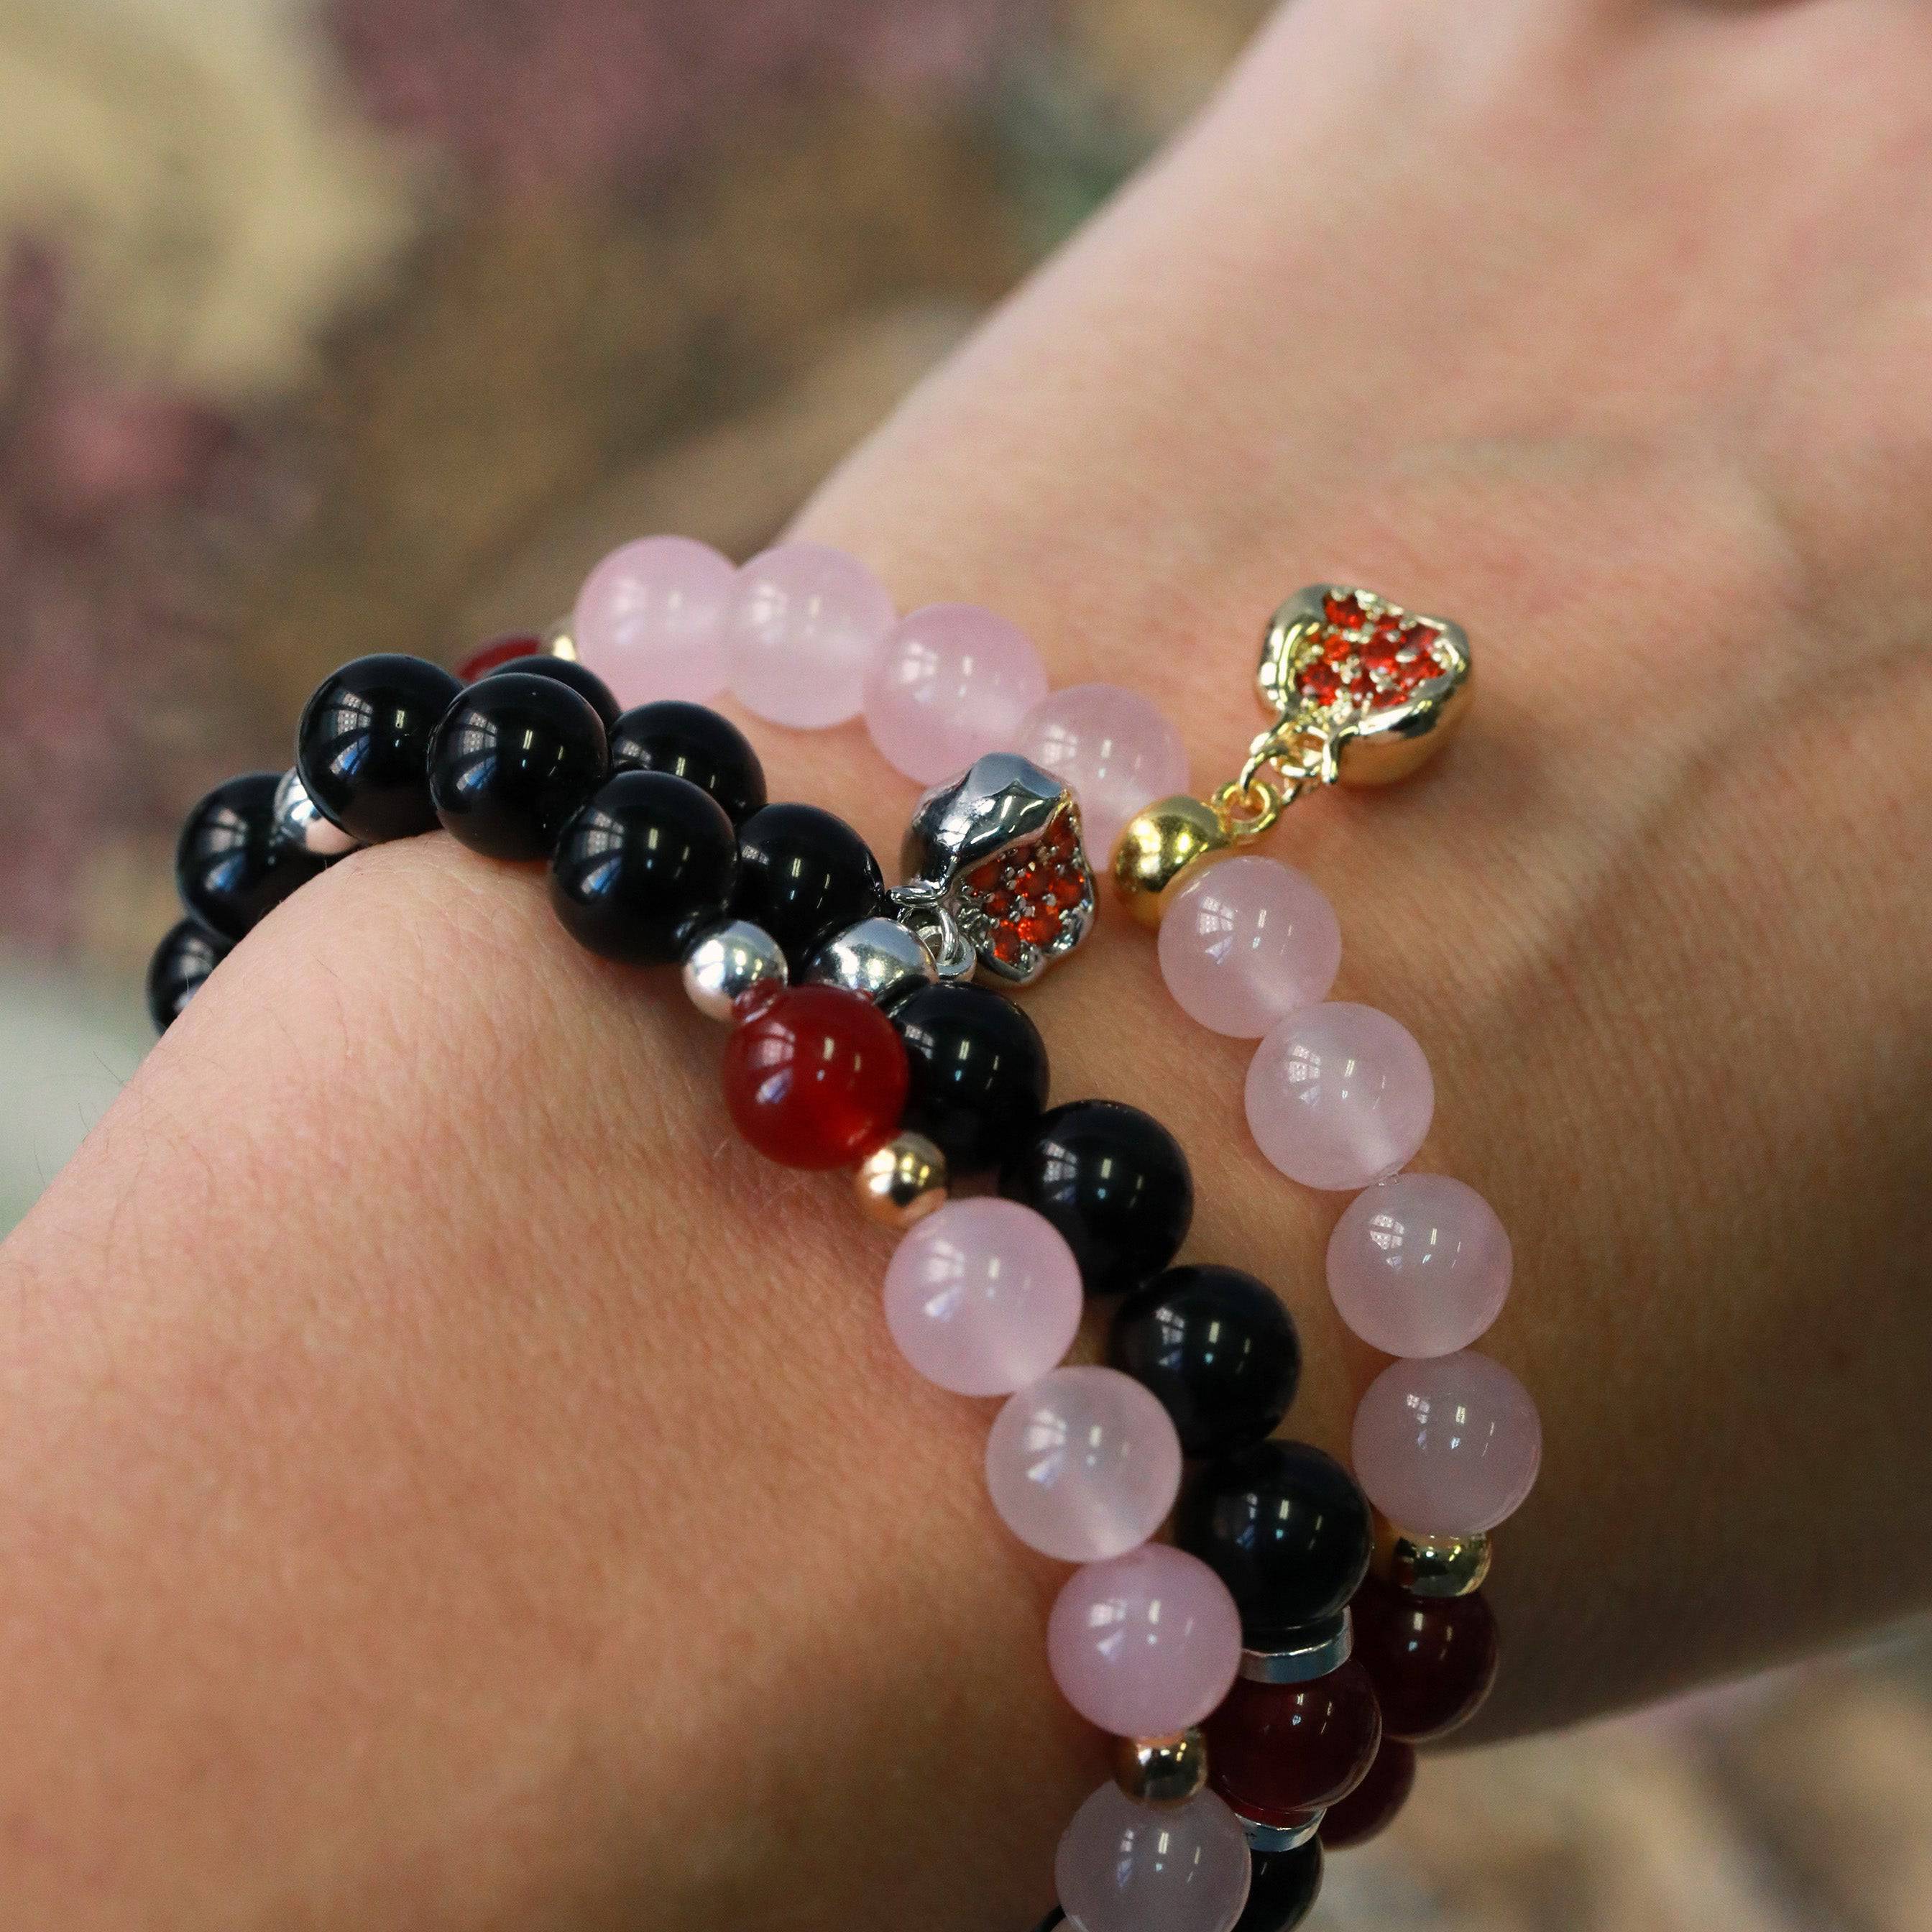 pomegranate gemstone stretchy charm bracelet in gold or silver inspired by Persephone and Hecate wrist